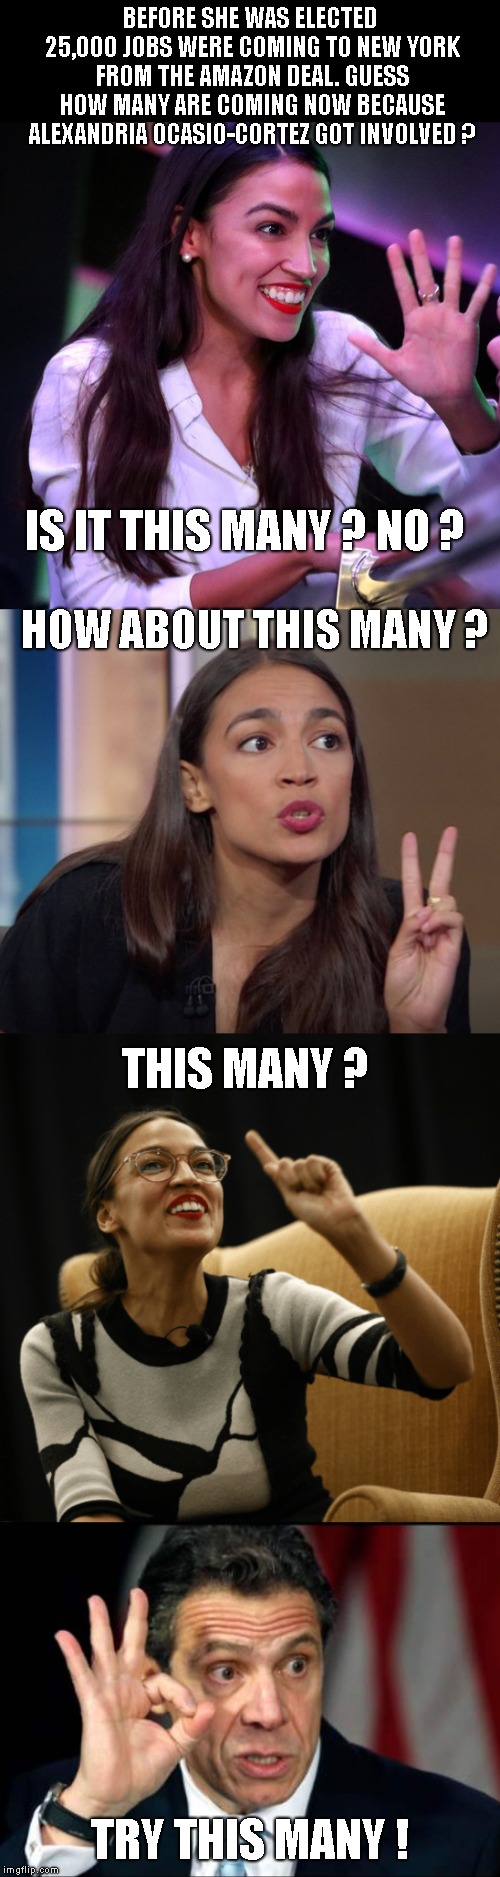 Notorious AOC, charging in like a baller ! So for the "little socialist" has cost New York 25,000 jobs! Keep up the good work! | BEFORE SHE WAS ELECTED 25,000 JOBS WERE COMING TO NEW YORK FROM THE AMAZON DEAL. GUESS HOW MANY ARE COMING NOW BECAUSE ALEXANDRIA OCASIO-CORTEZ GOT INVOLVED ? IS IT THIS MANY ? NO ? HOW ABOUT THIS MANY ? THIS MANY ? TRY THIS MANY ! | image tagged in alexandria ocasio-cortez,aoc,nyc amazon deal,25000 jobs,socialism always fails | made w/ Imgflip meme maker